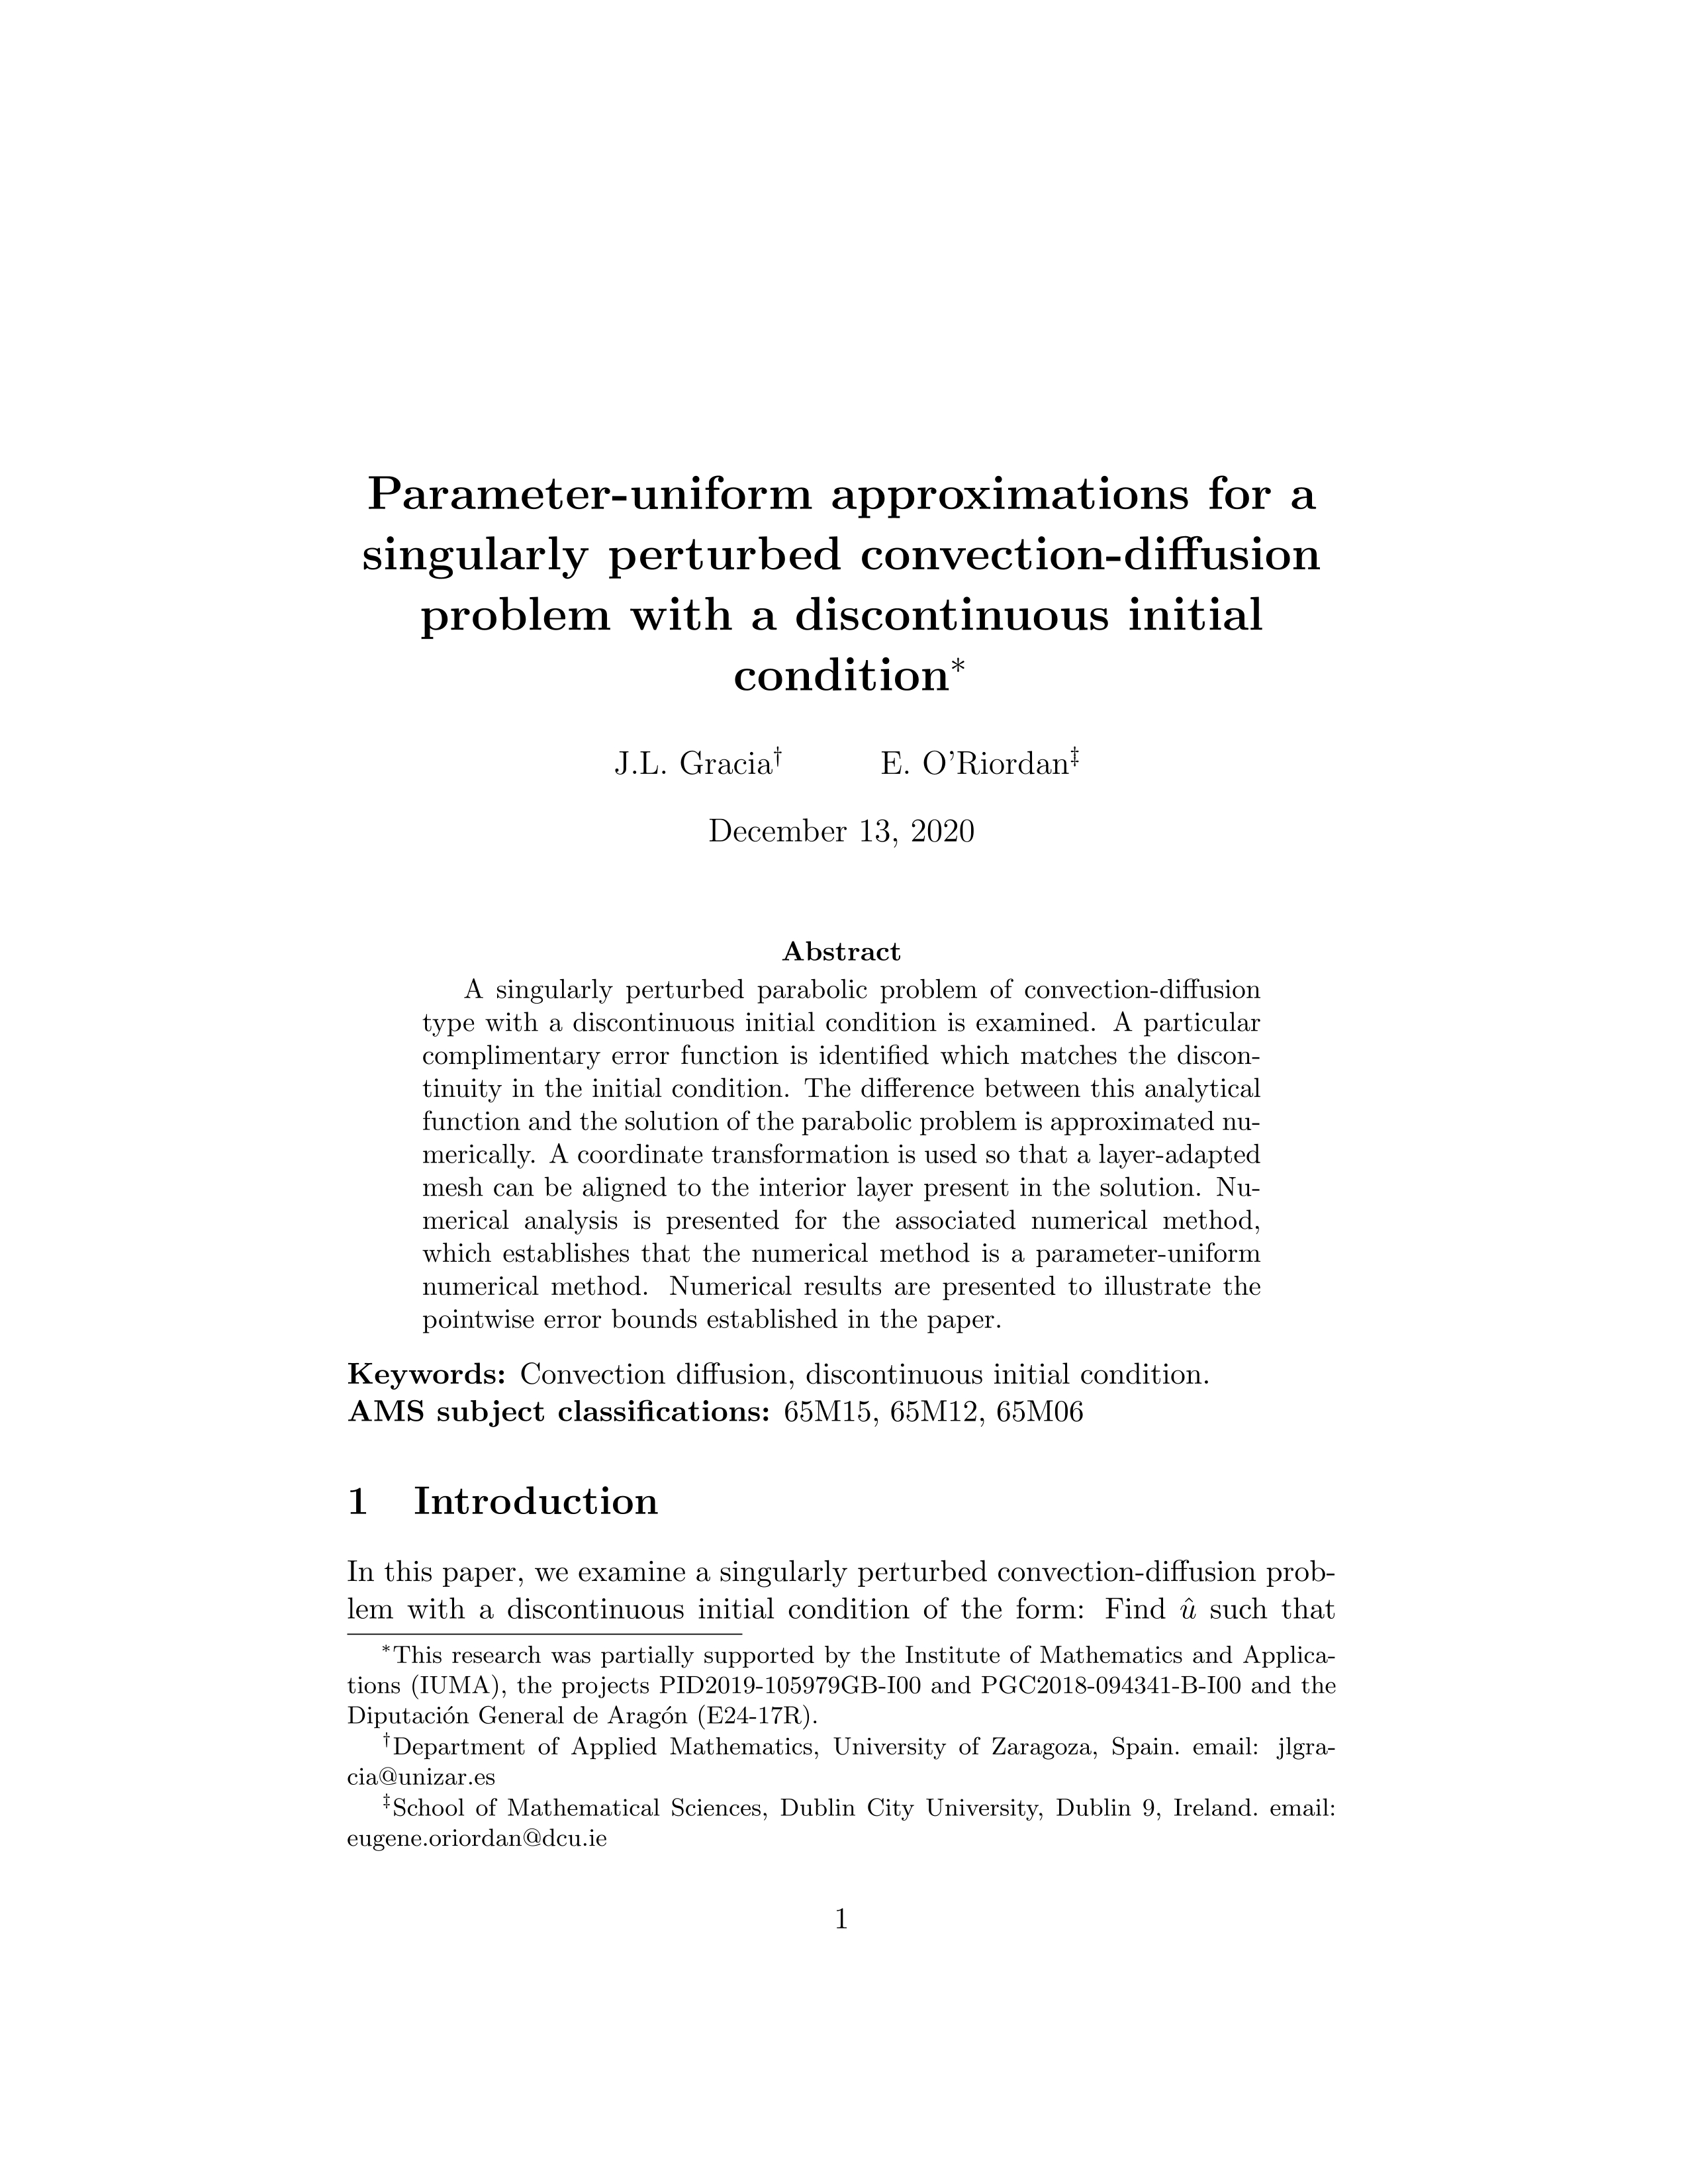 Parameter-uniform approximations for a singularly perturbed convection-diffusion problem with a discontinuous initial condition